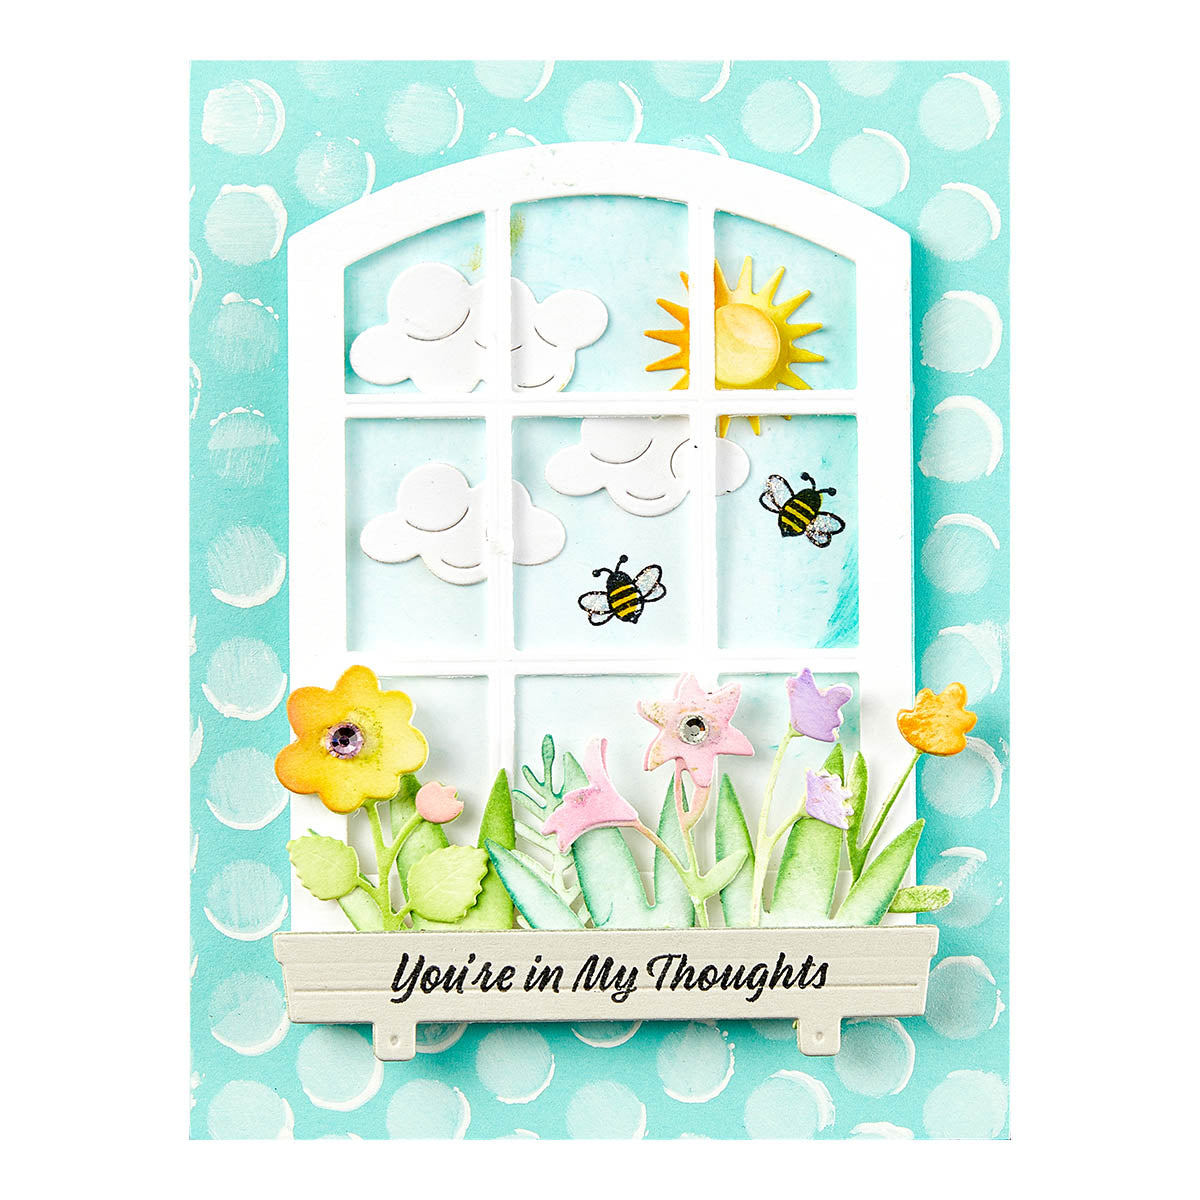 Spellbinders - Sending Sunshine Sentiments Clear Stamp Set from the Windows with a View Collection by Tina Smith